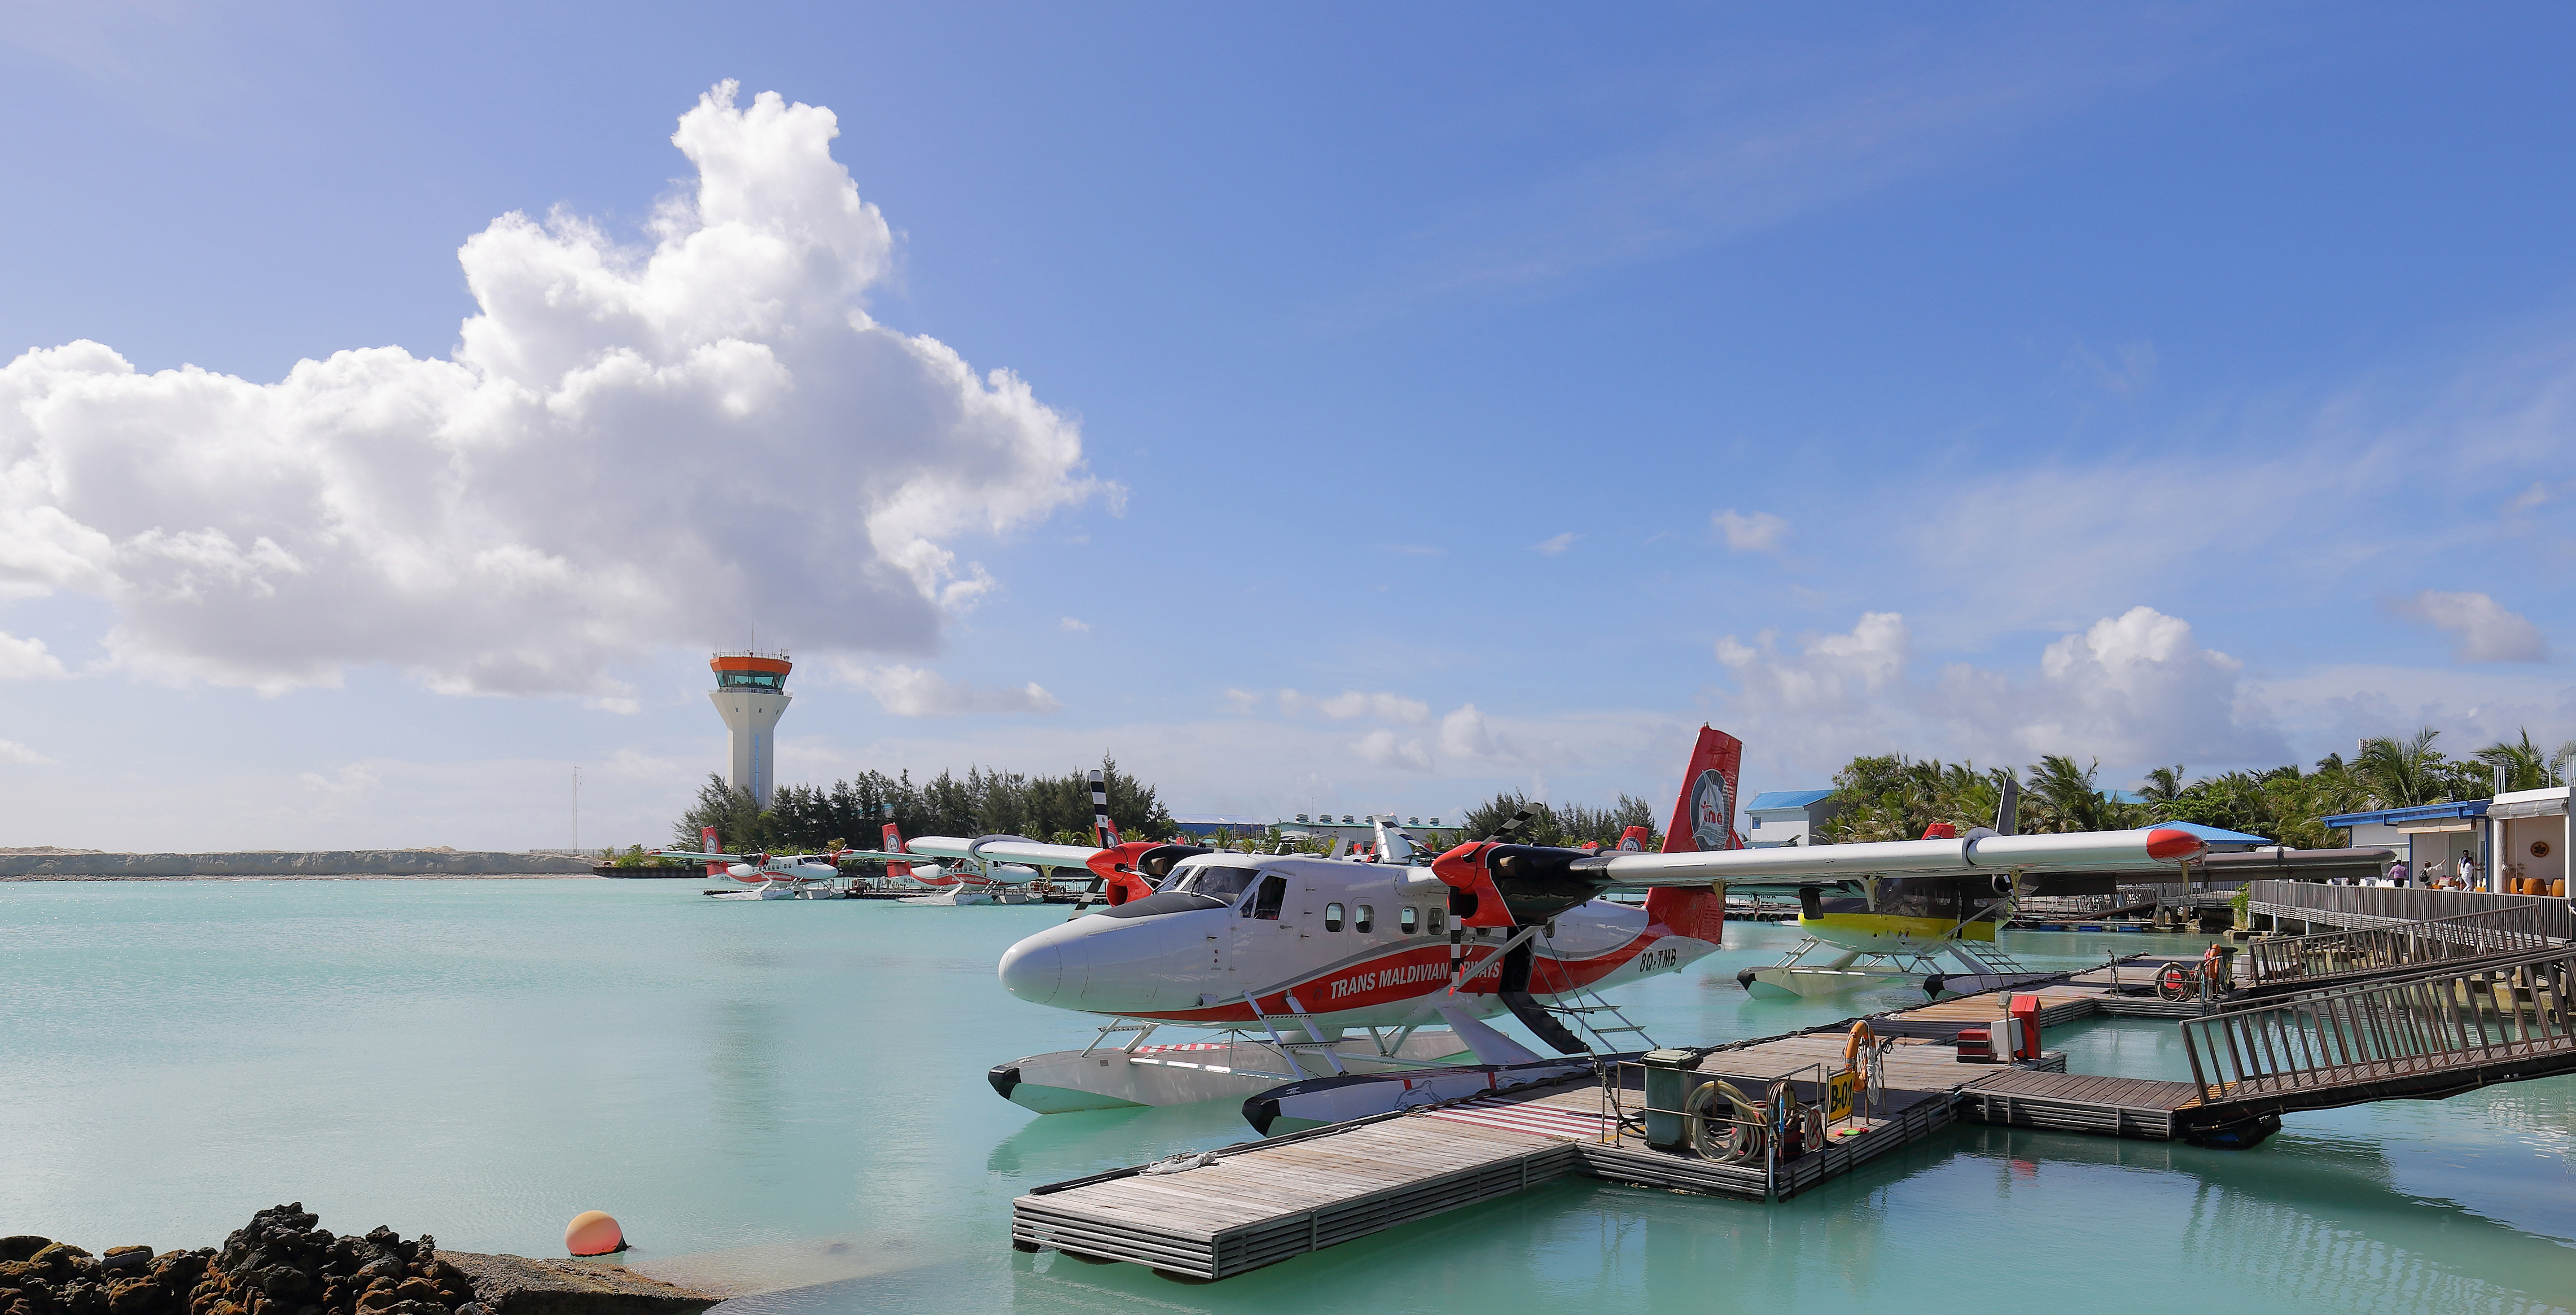 TMA DHC-6 Twin Otter at Velana International Airport, May 2017